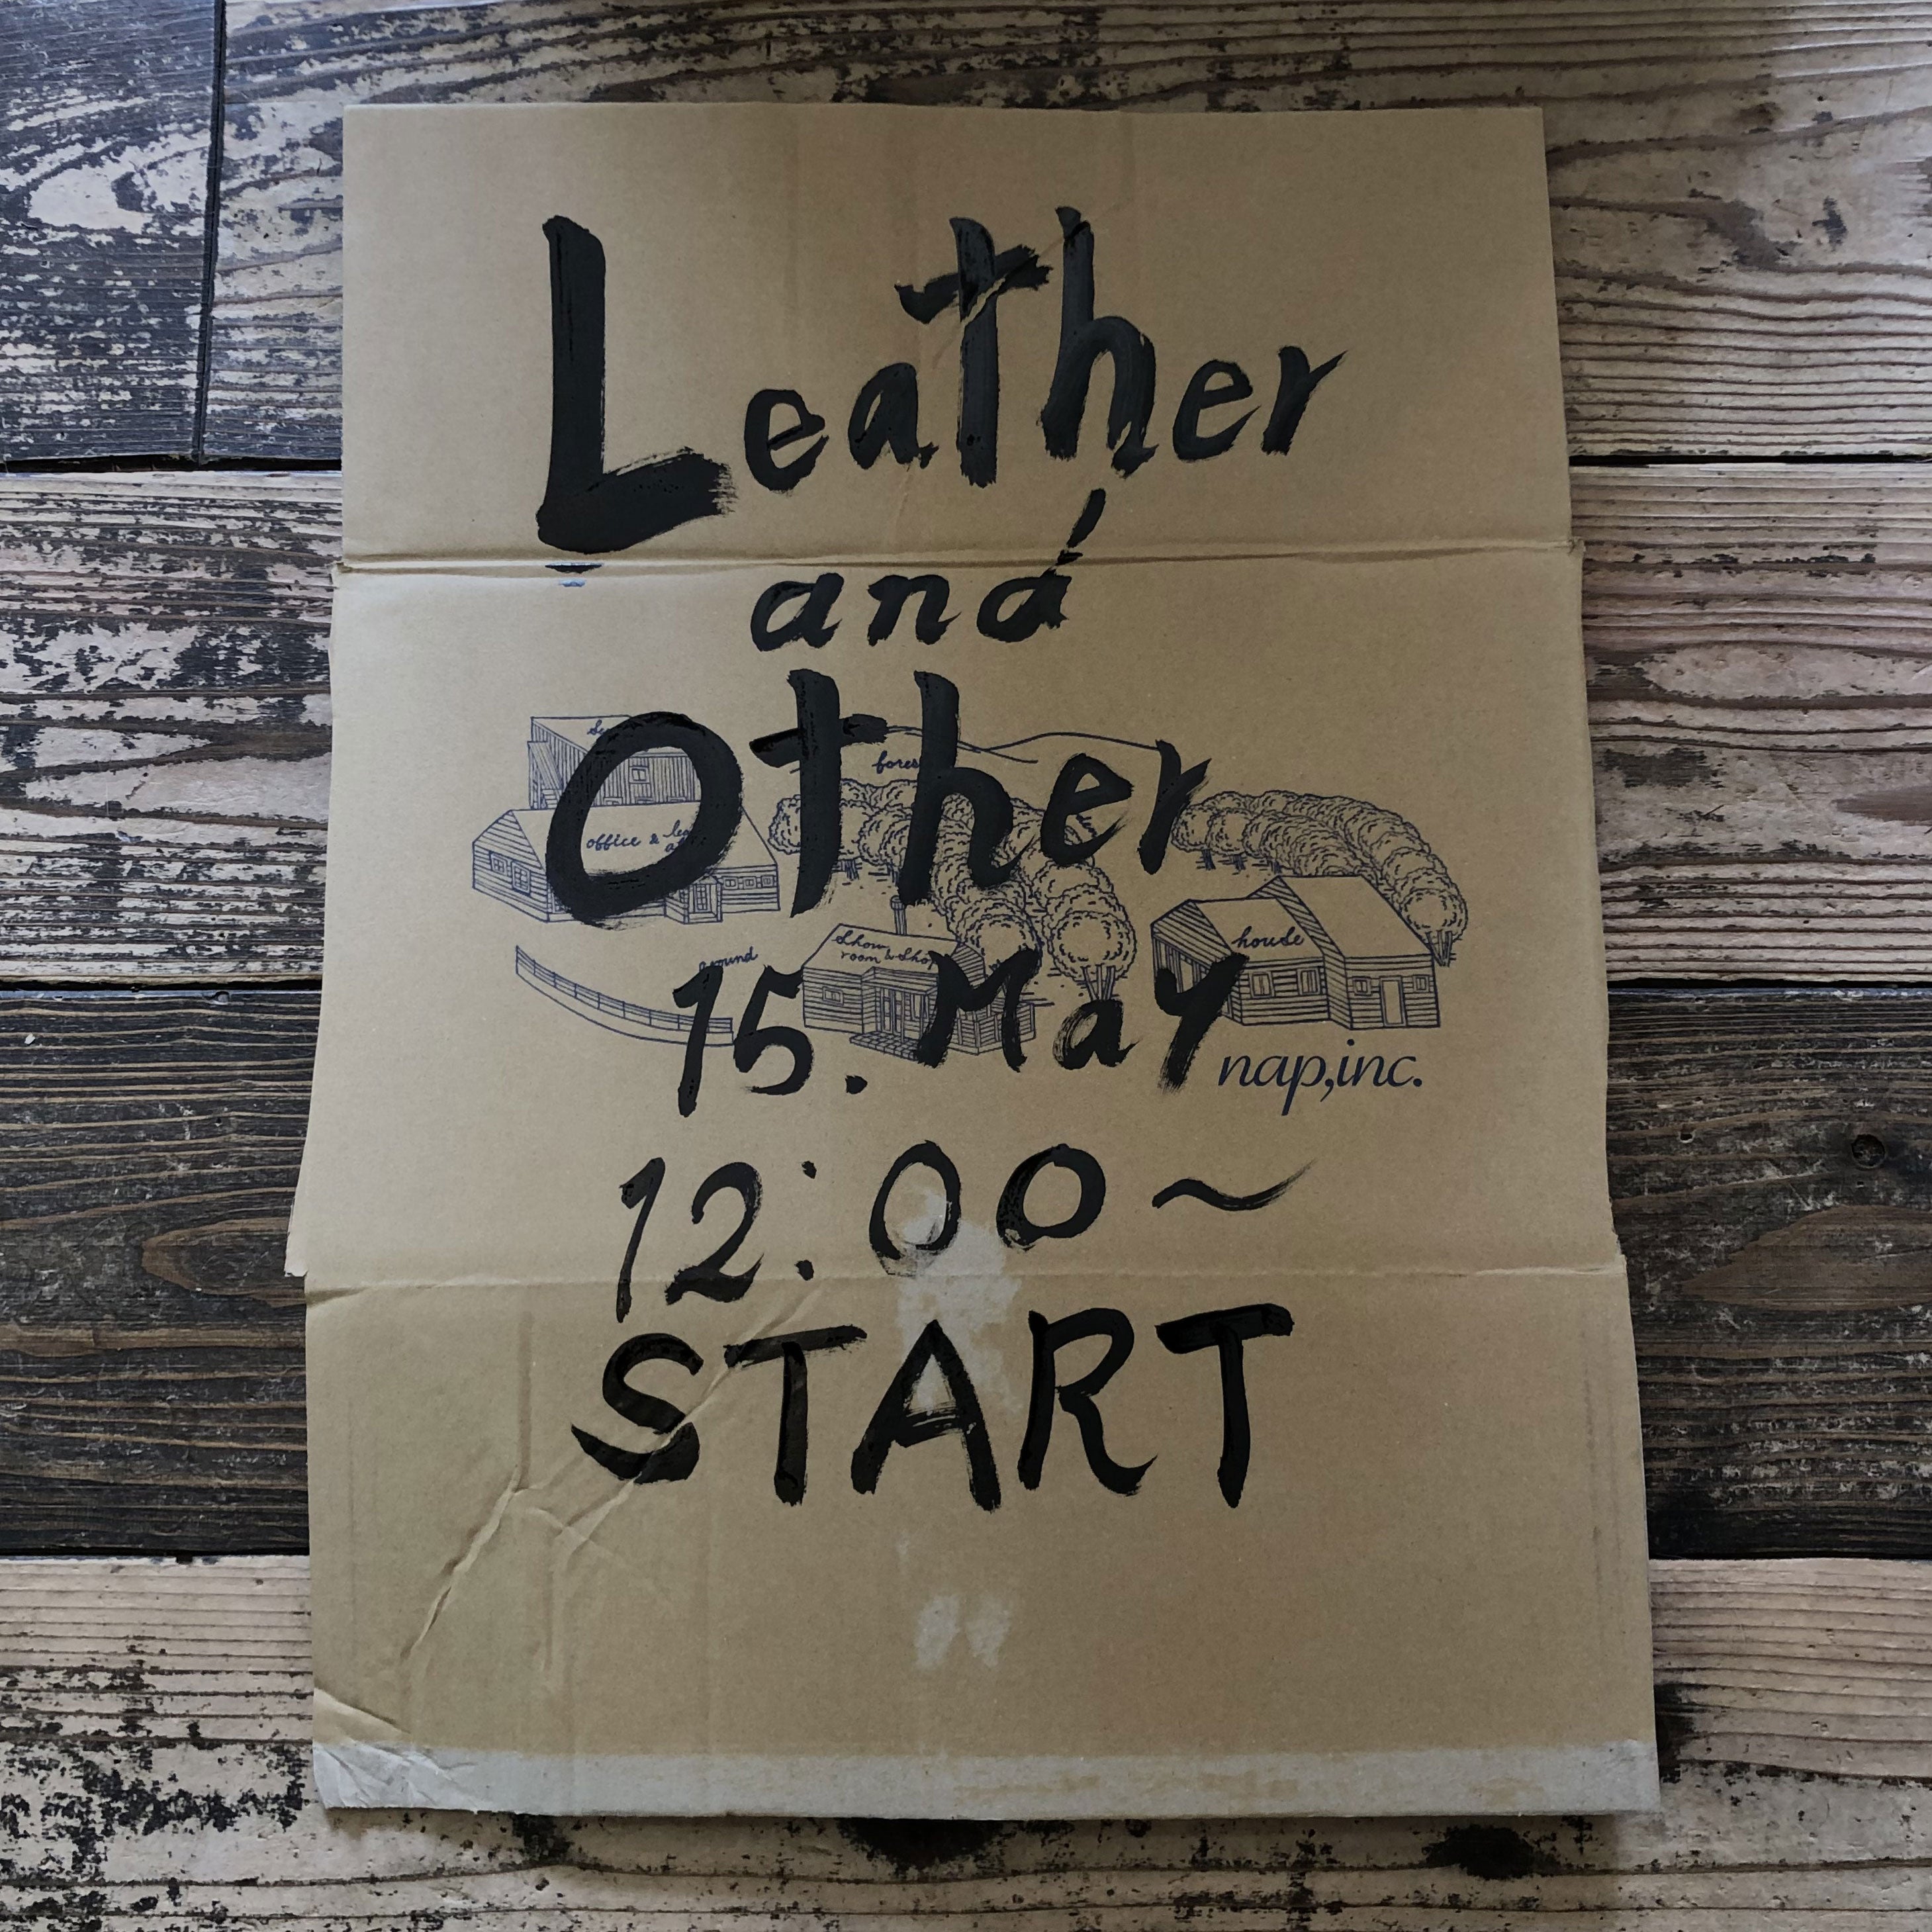 【 Leather and Other 】 Sample Sale